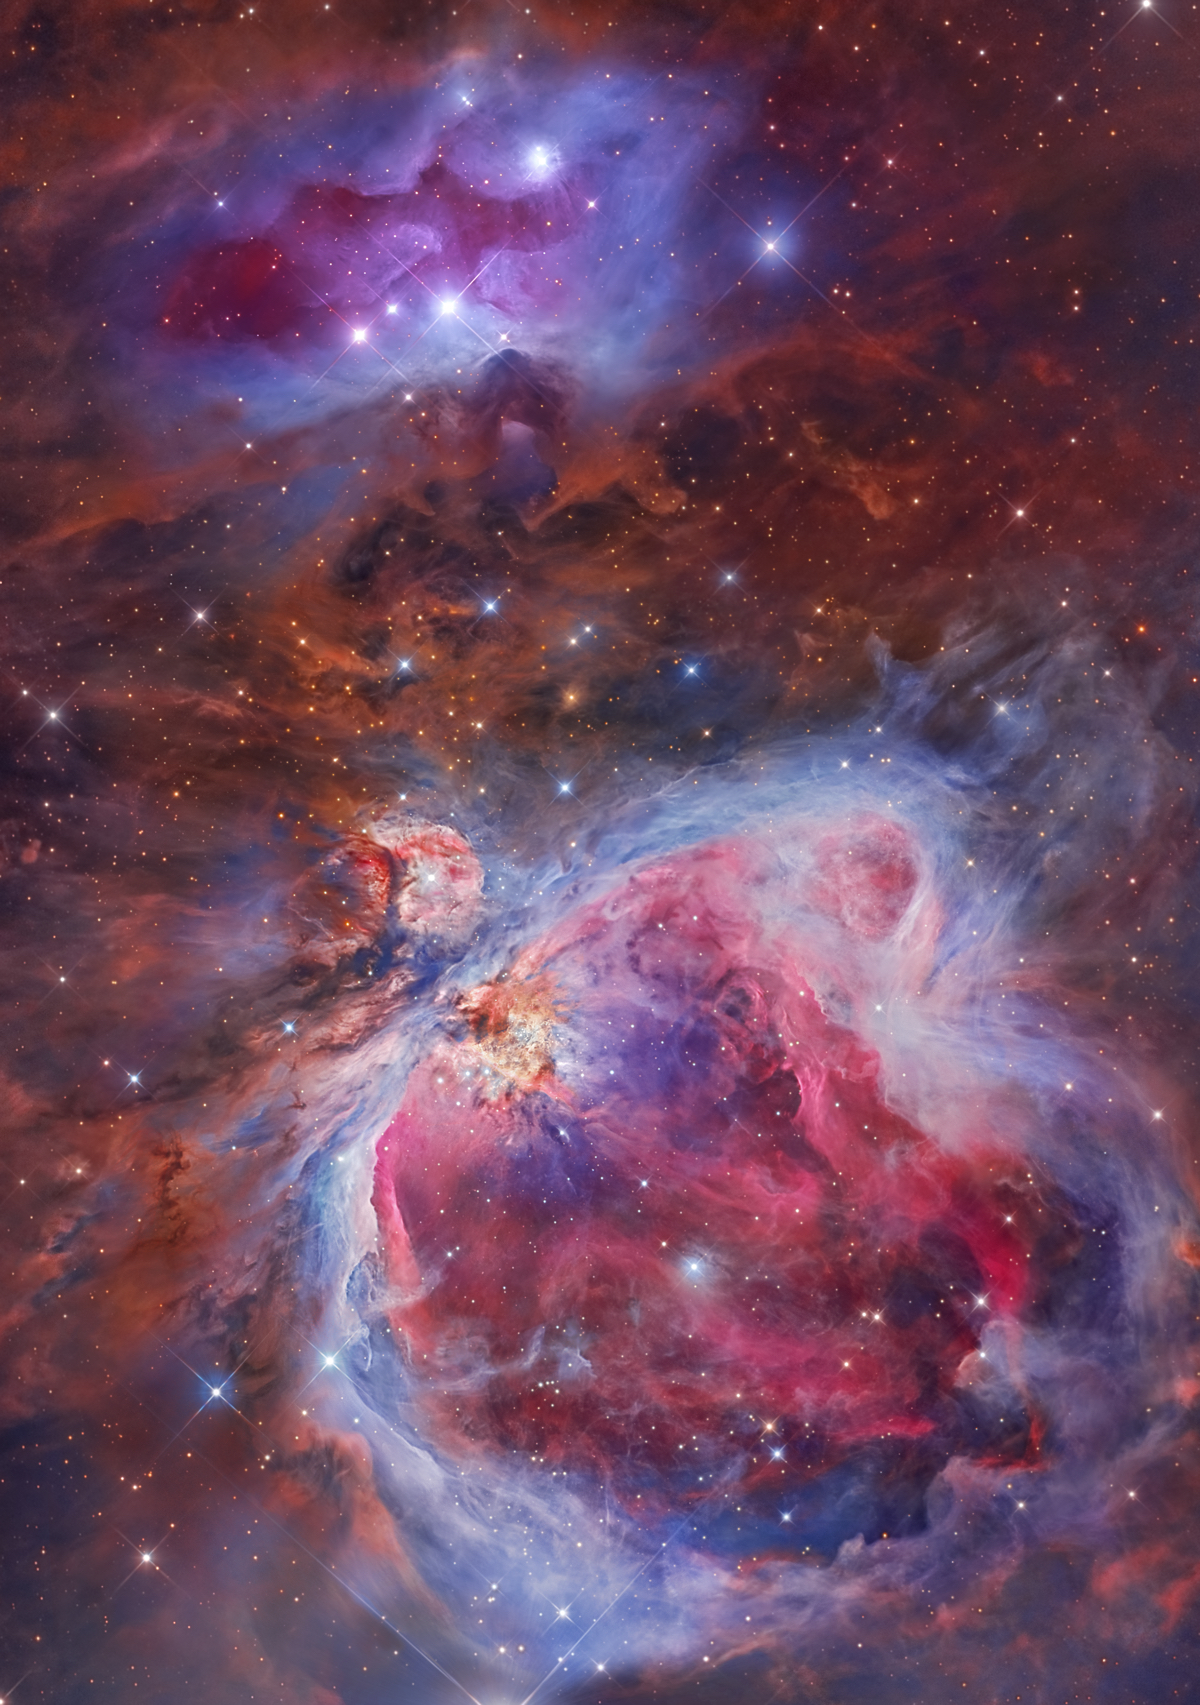 Insight Investment Astronomy Photographer of the Year